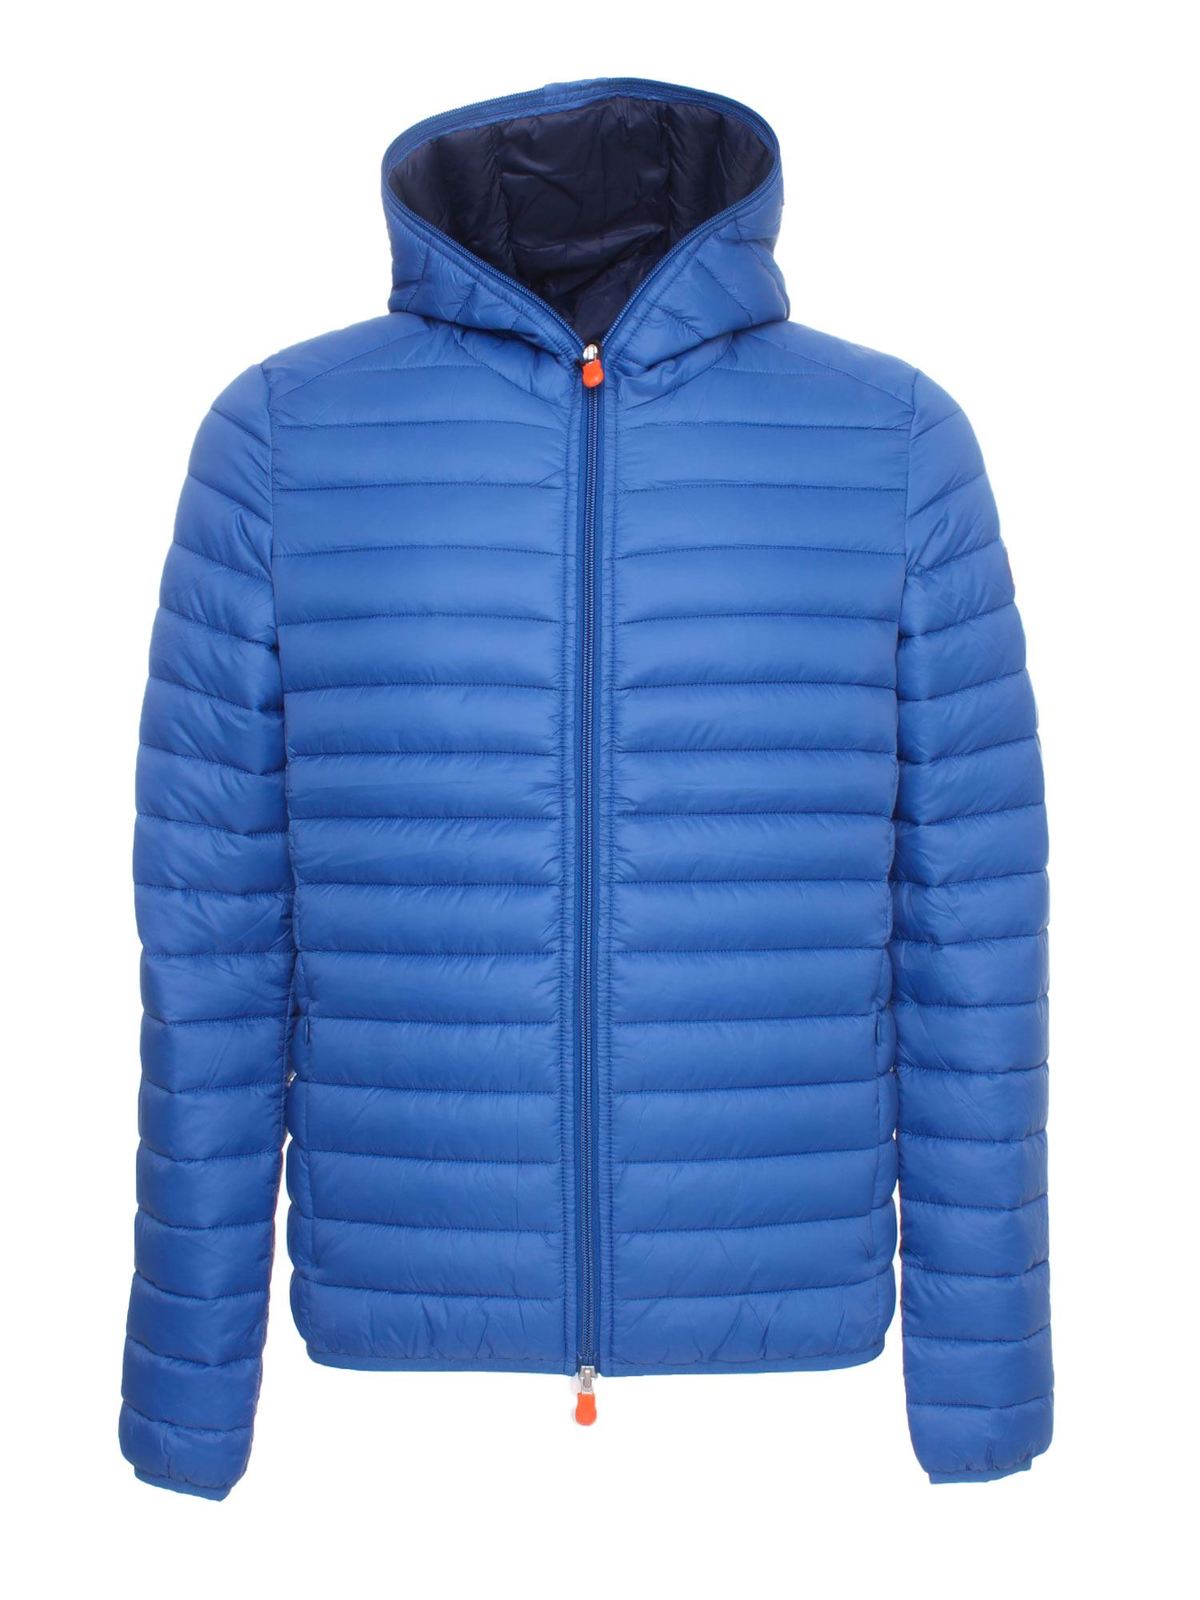 SAVE THE DUCK QUILTED HOODED PUFFER JACKET IN SNORKEL BLUE